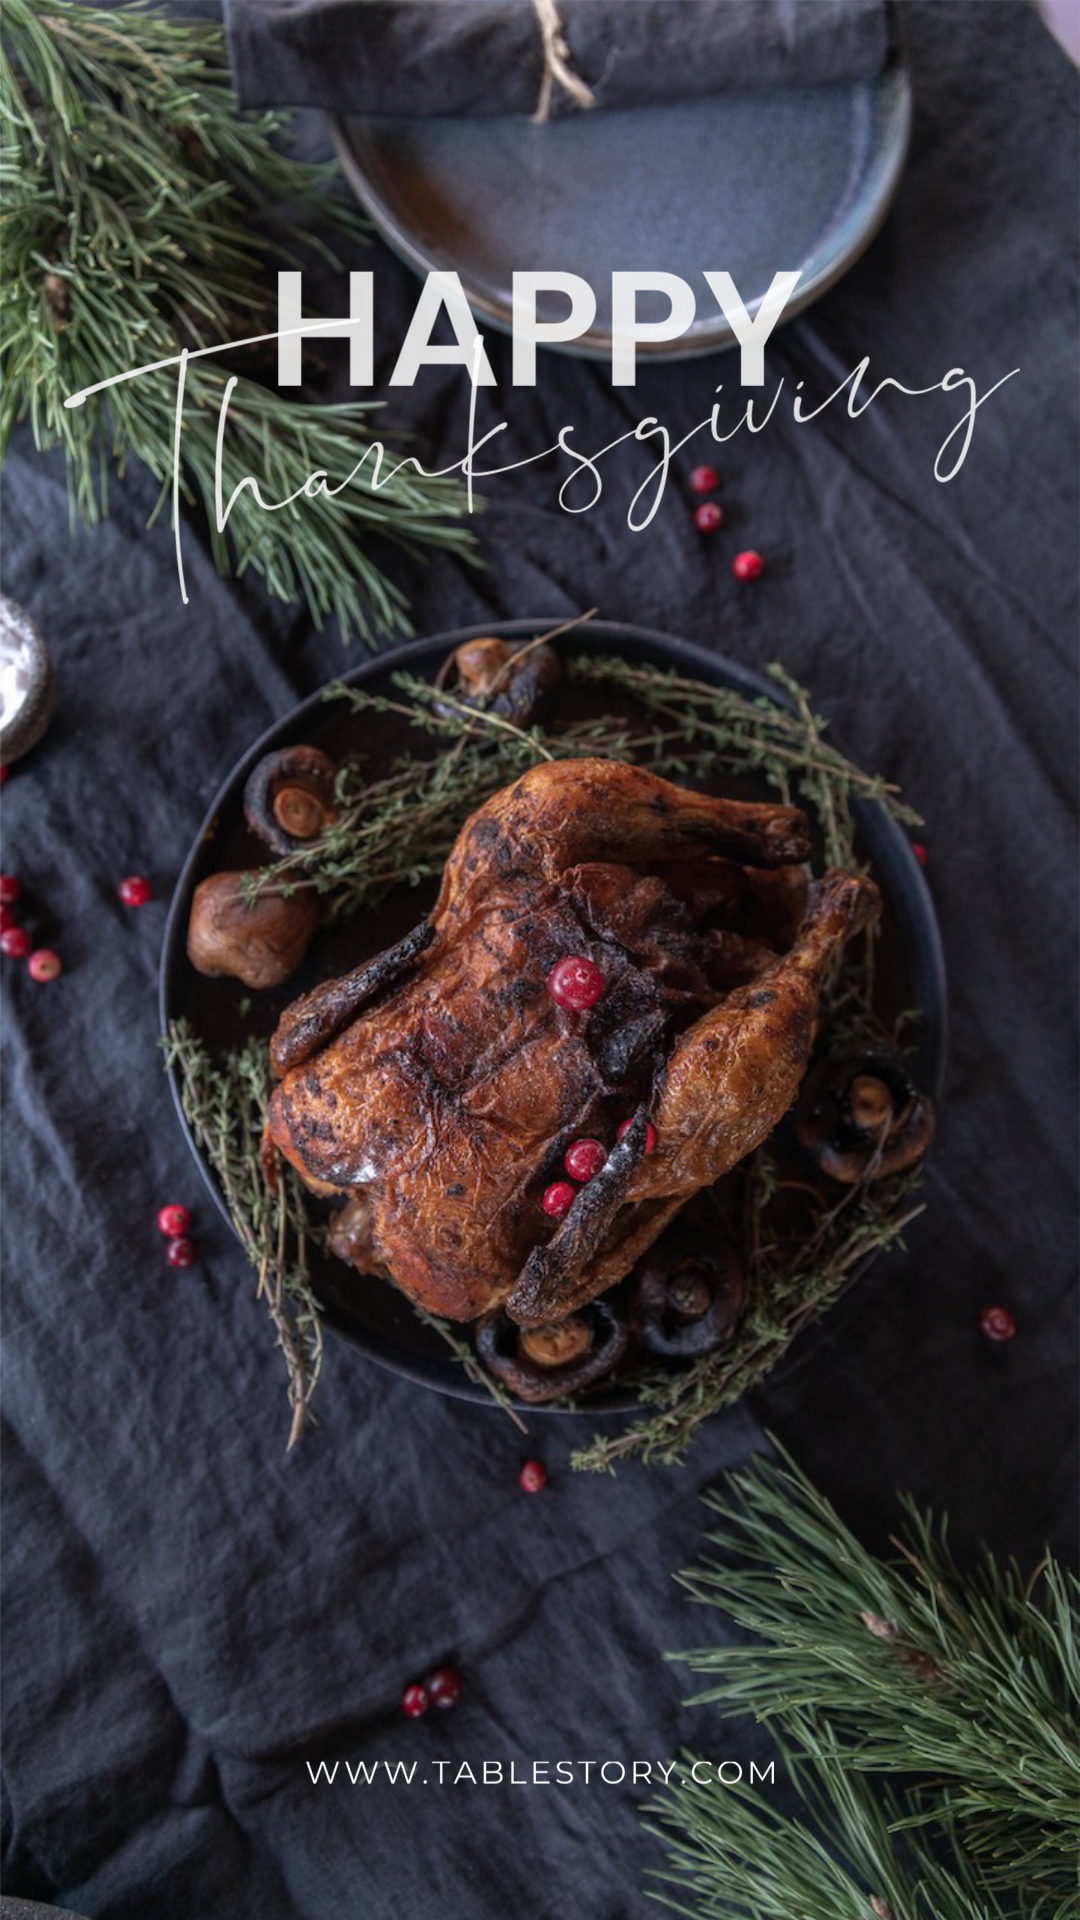 A Roasted Turkey In A Bowl On A Table With Pine Branches And Berries Thanksgiving Template